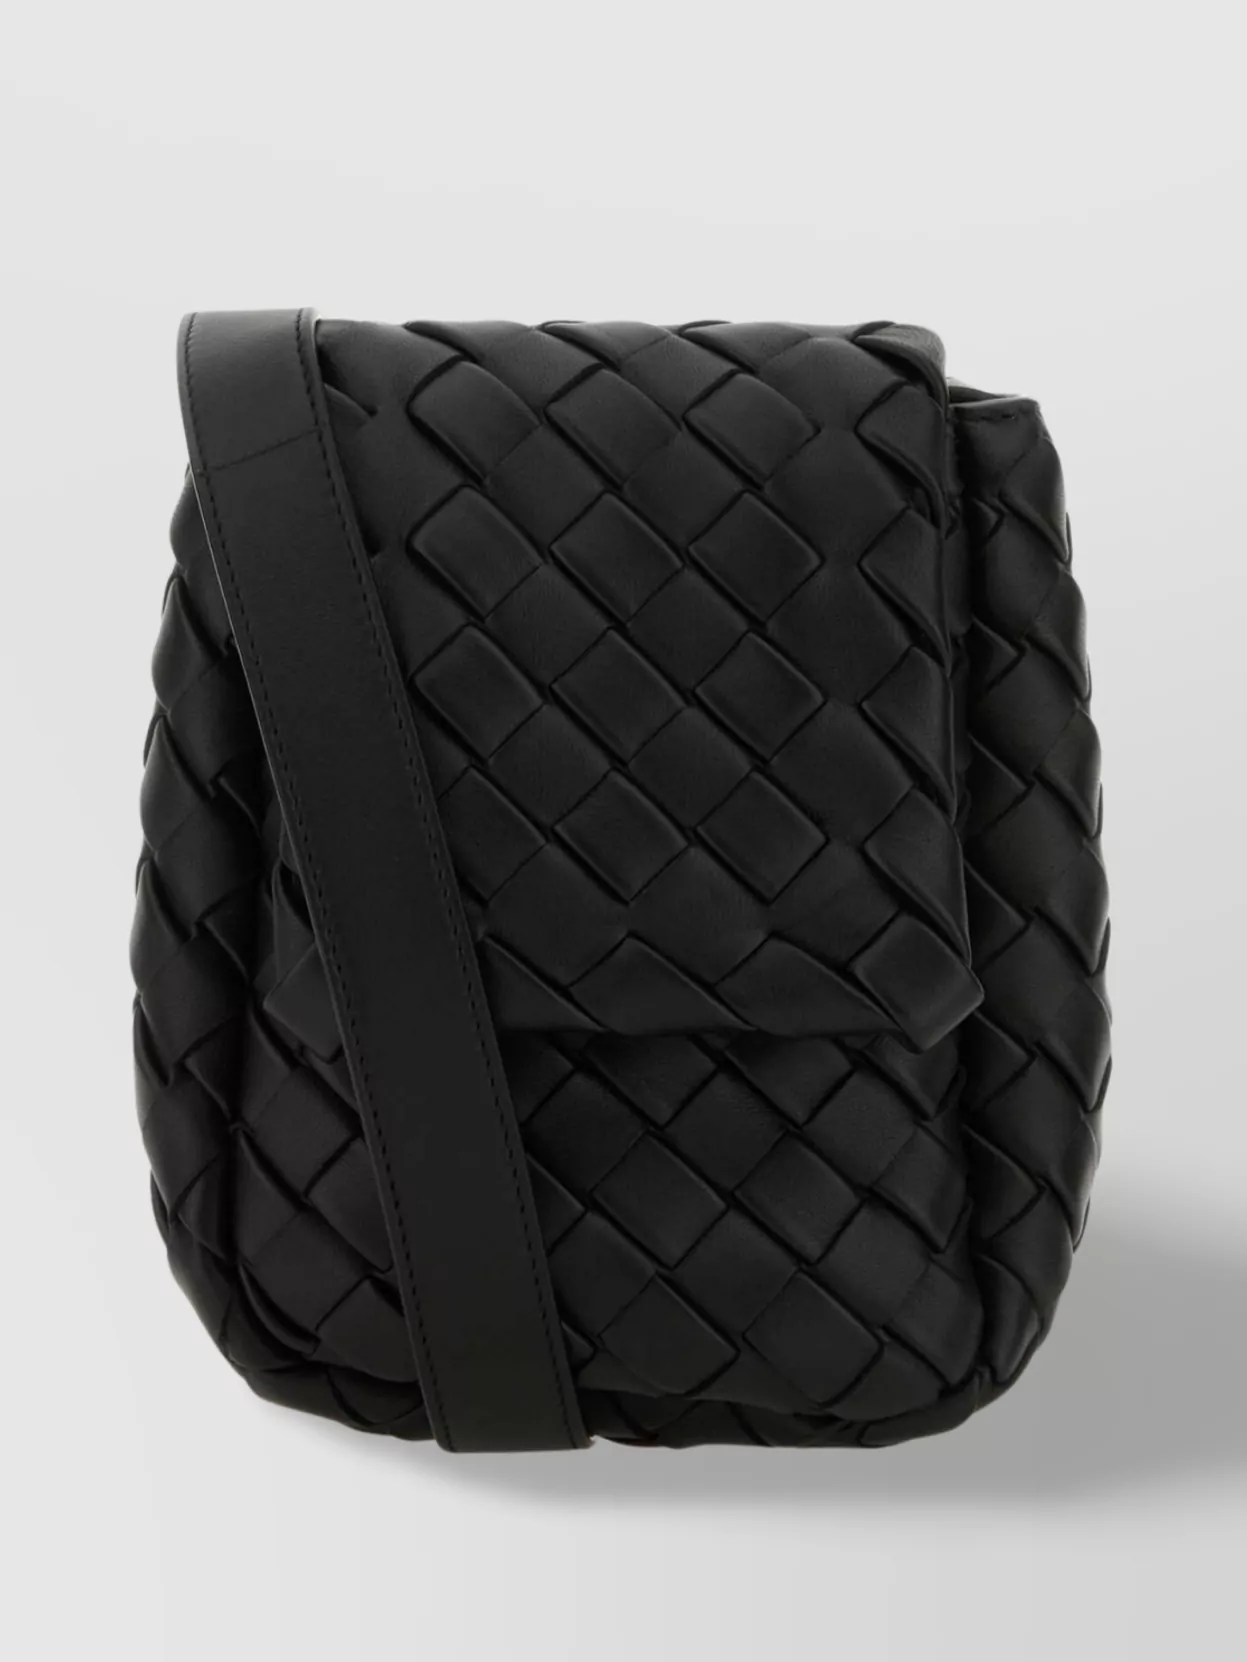 Shop Bottega Veneta Leather Crossbody Bag With Foldover Top And Quilted Design In Black